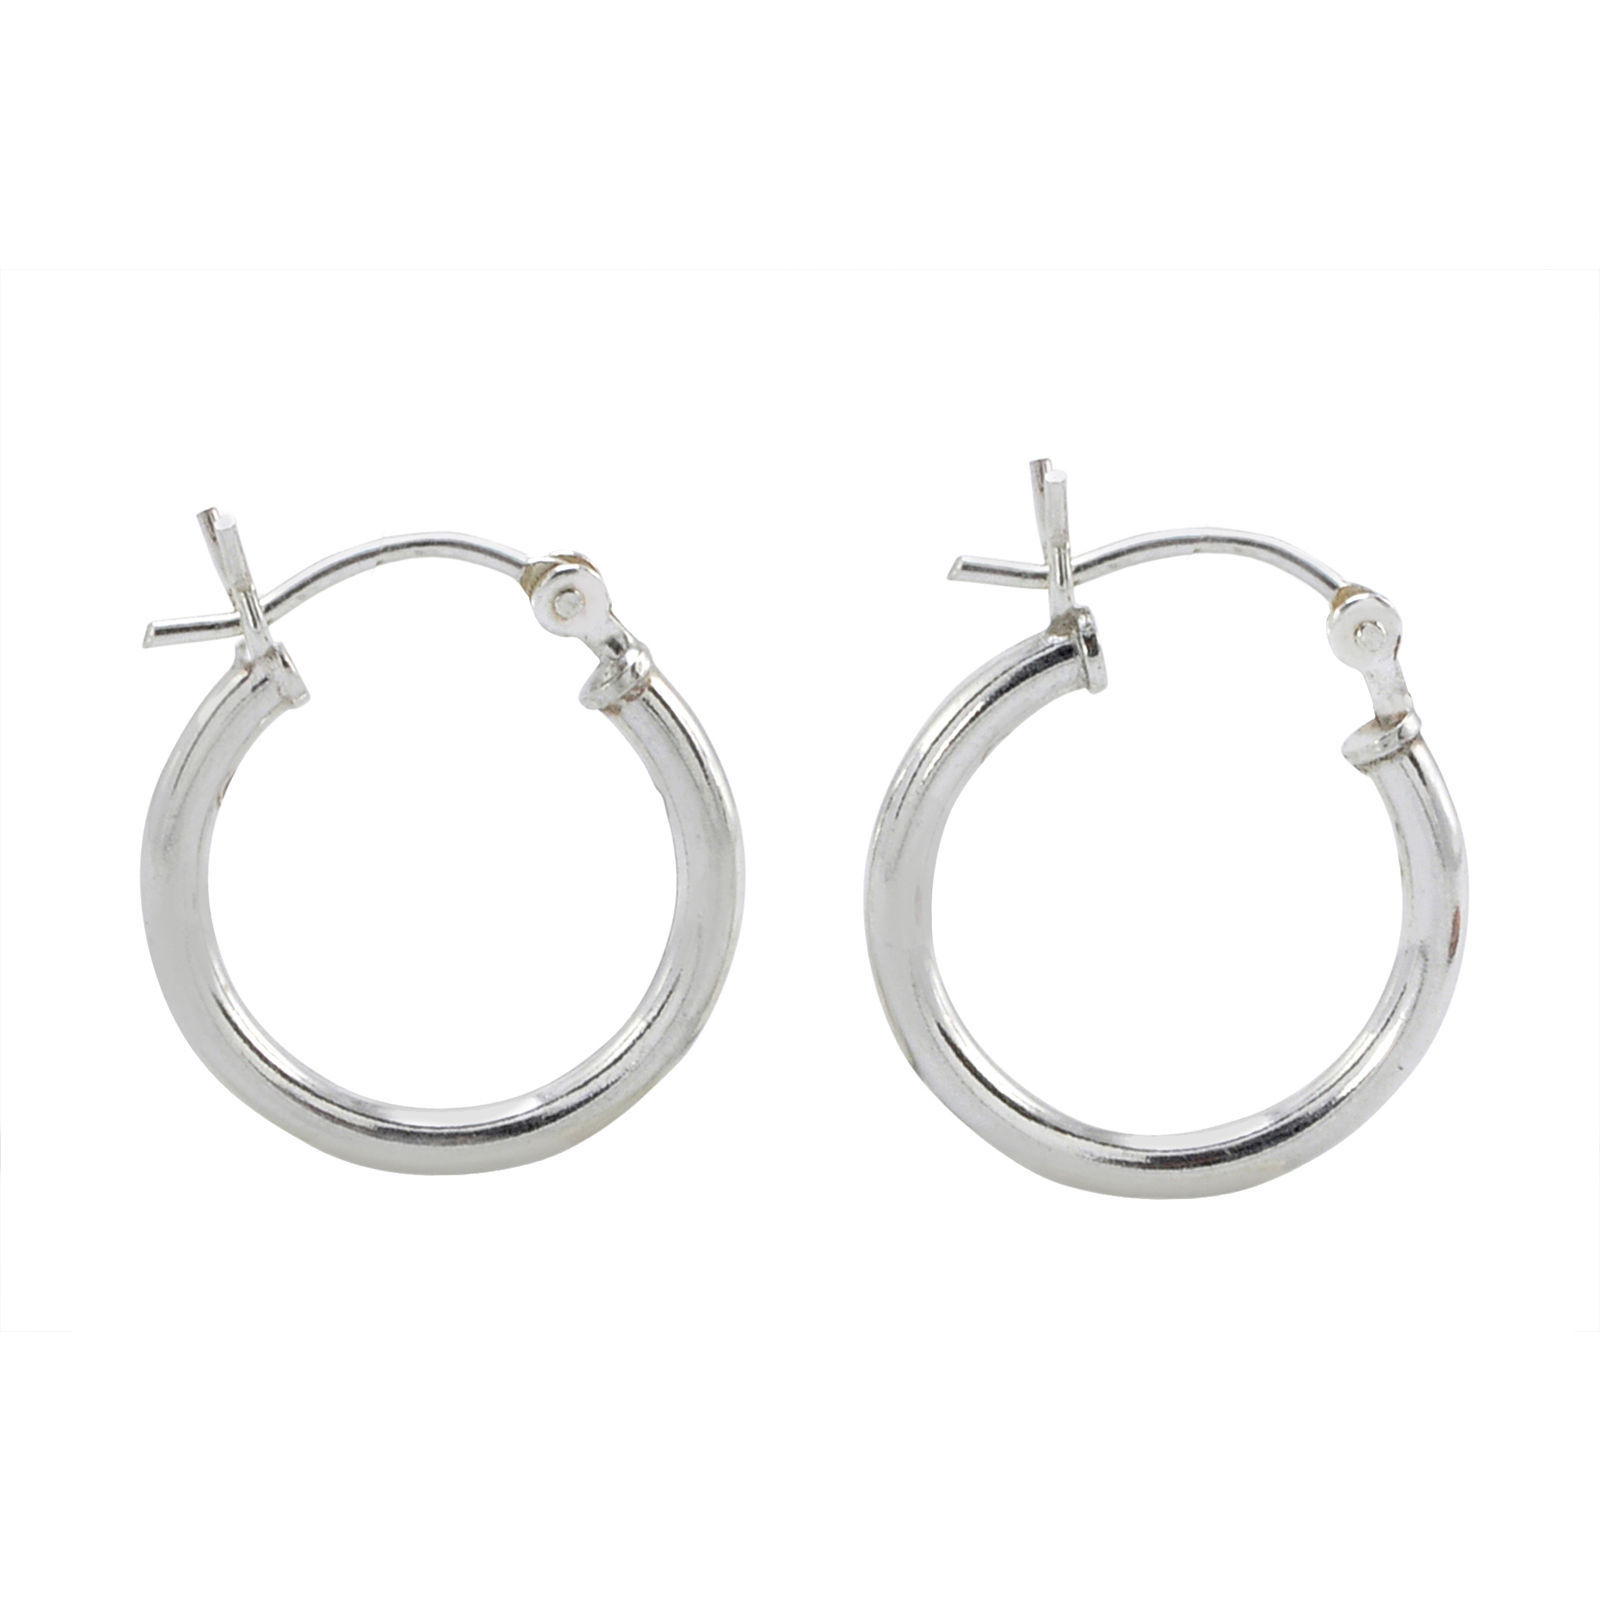 Primary image for Sterling Silver Hoop Earrings High Polish Latch Closure 16mm